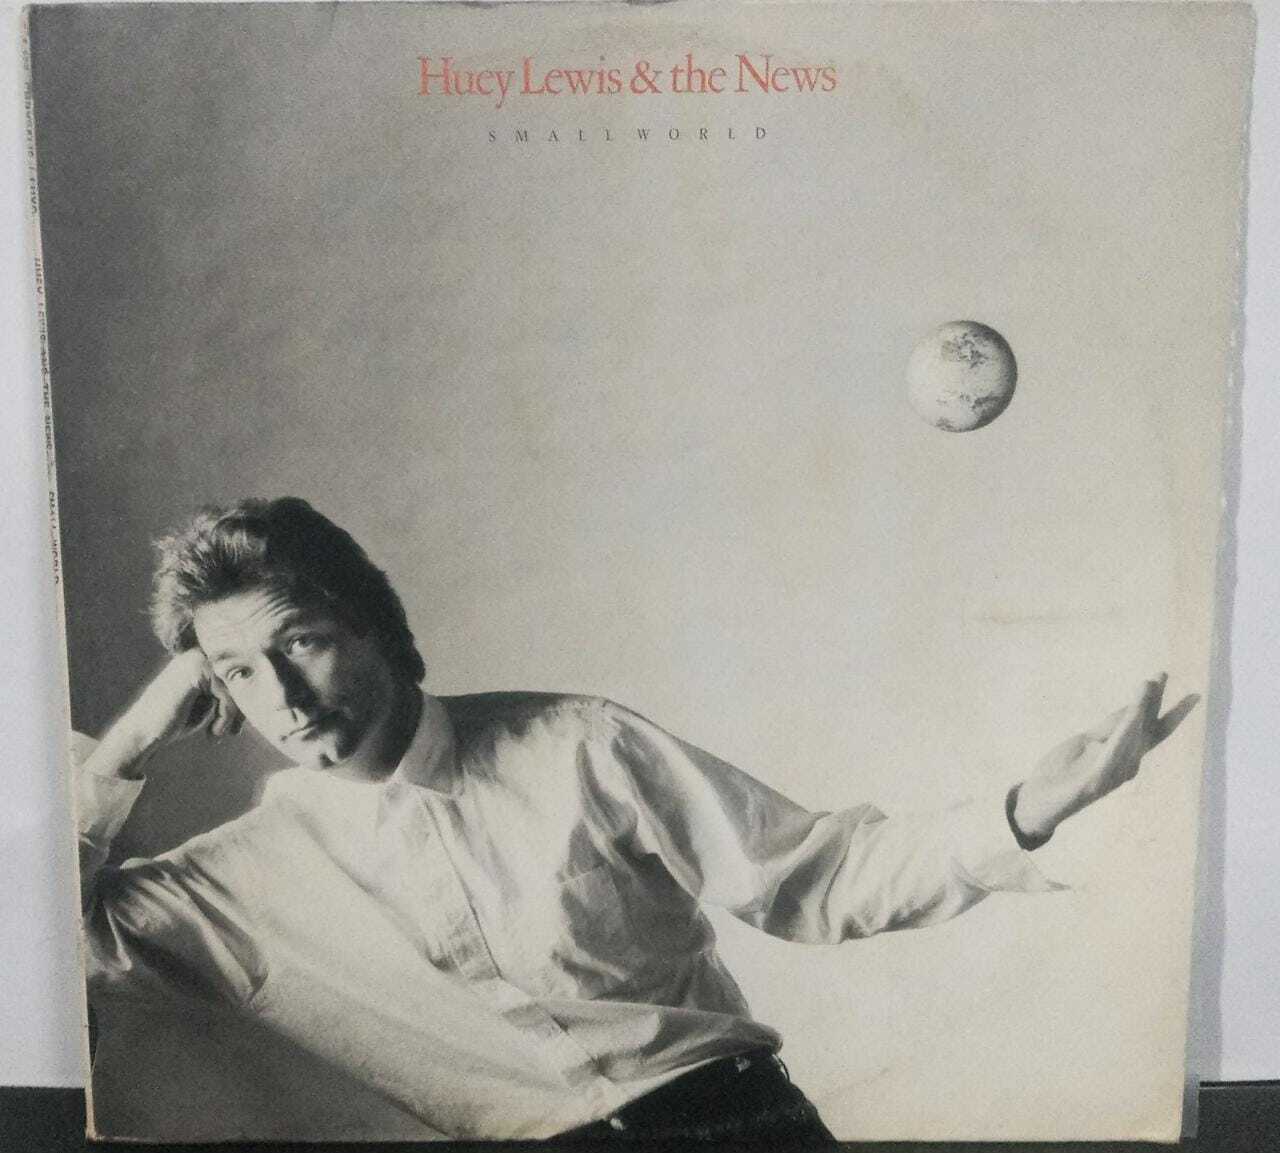 Vinil - Huey Lewis and the News - Small World